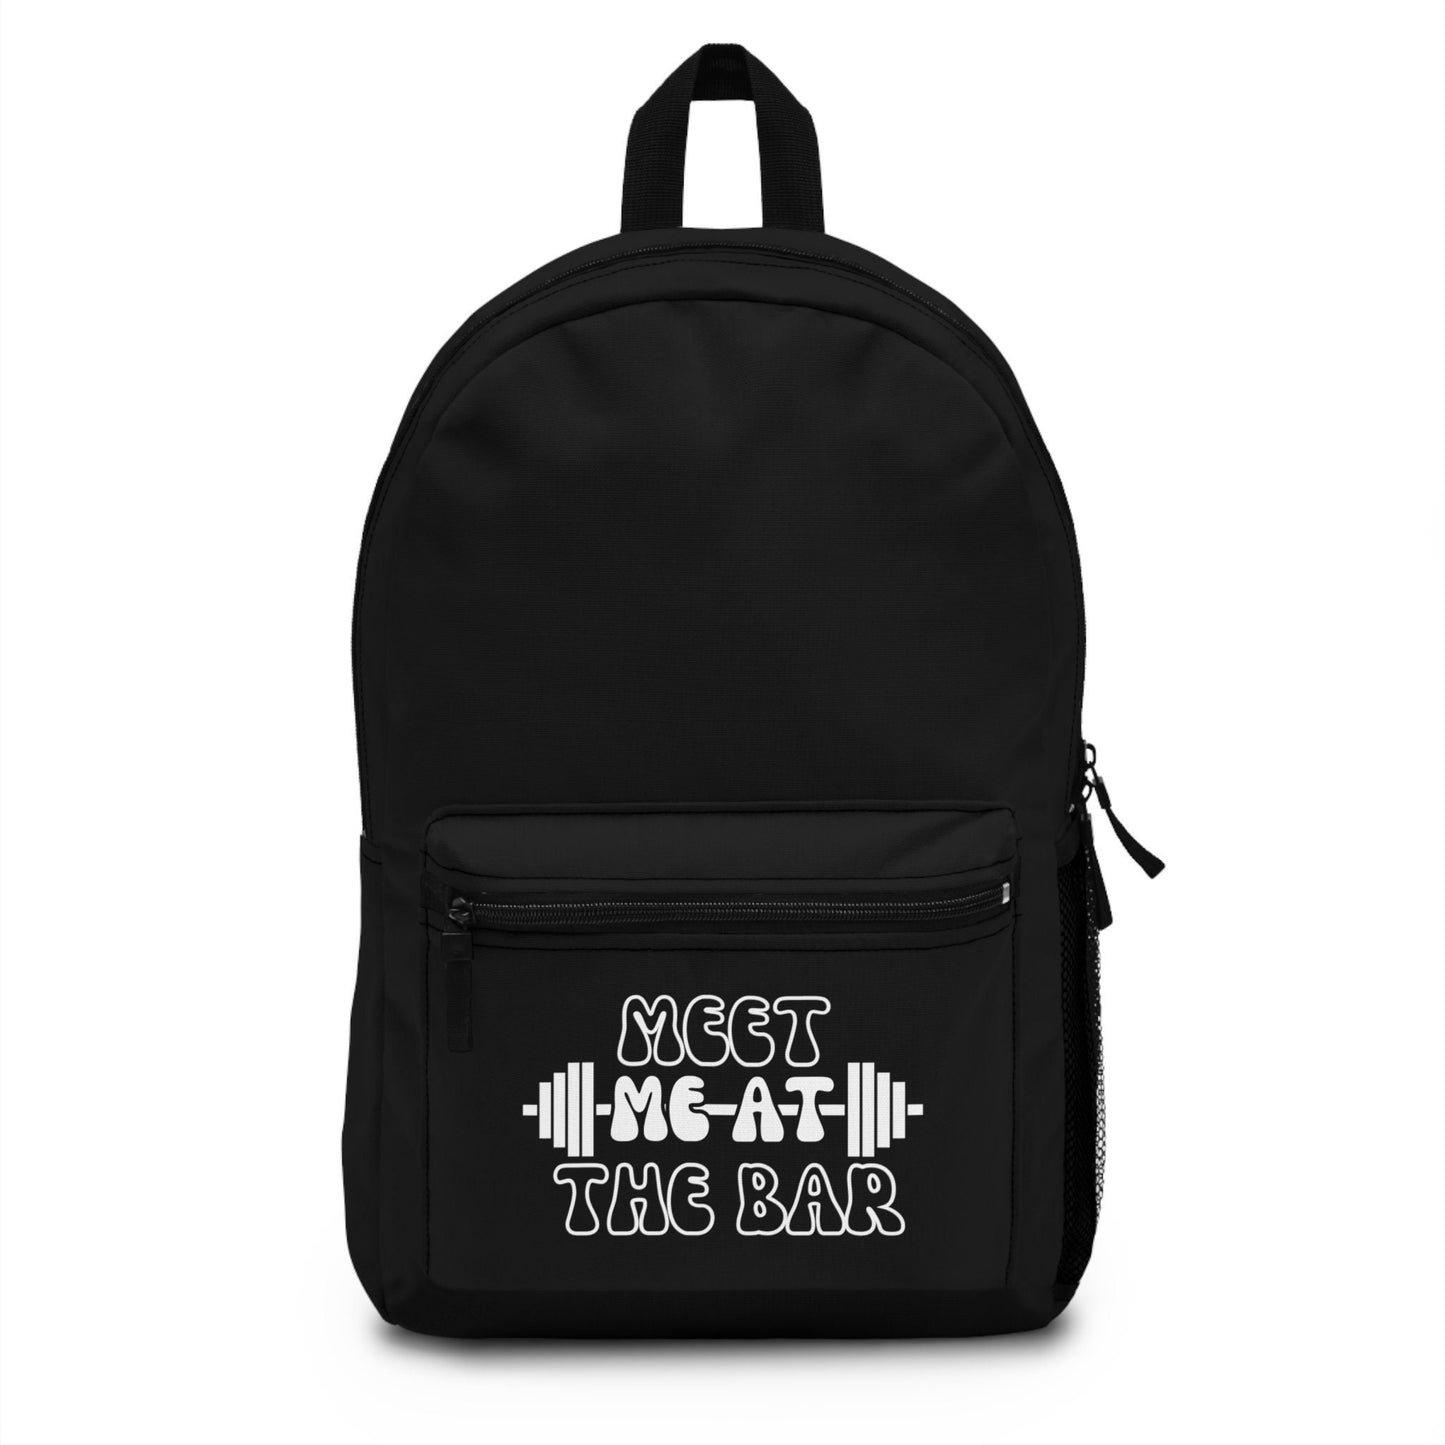 Meet Me At The Bar Gym, Fitness, Athletic Weightlifting Backpack